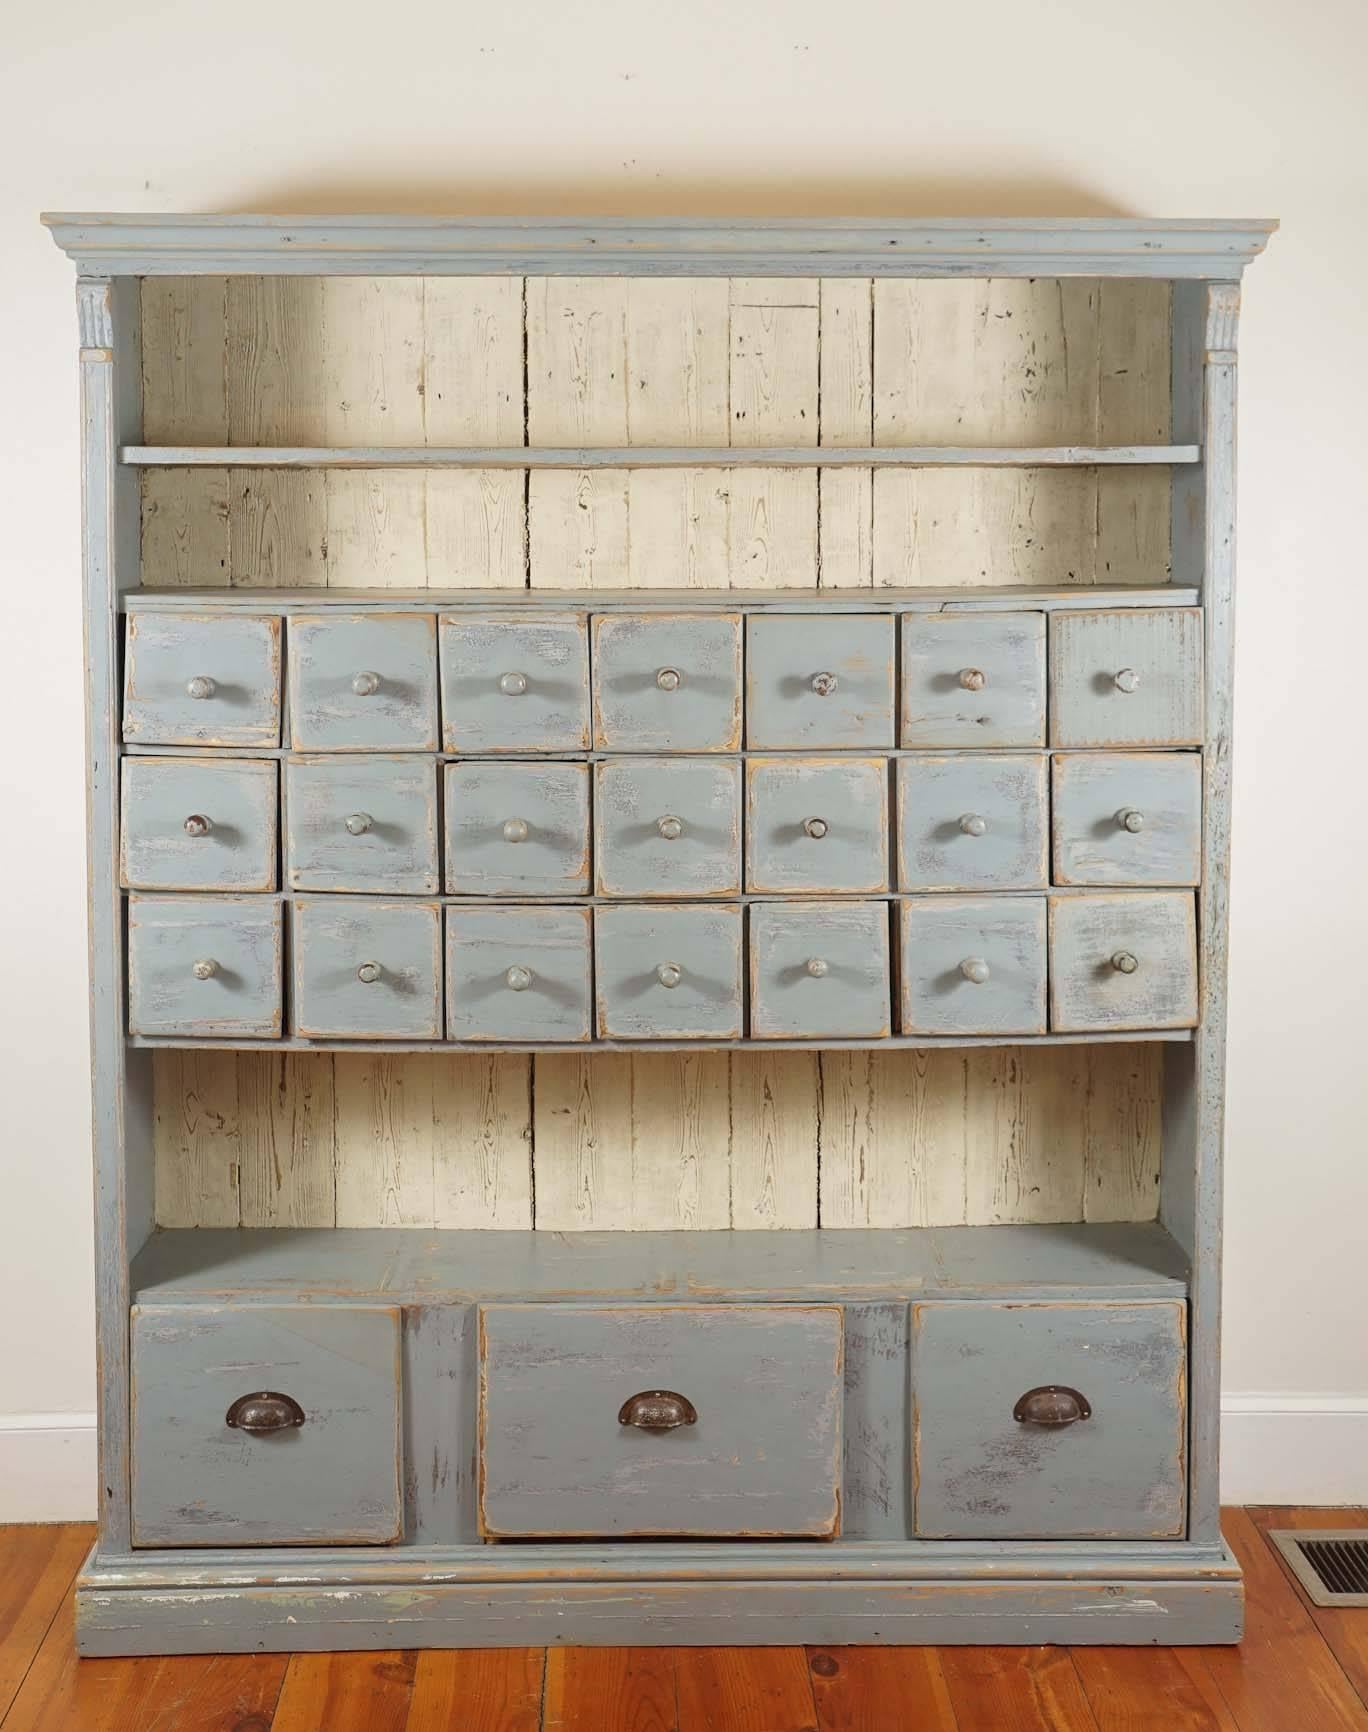 This unique cupboard has it all. Open shelves, 21 apothecary drawers in the middle and three deep useful drawers on the bottom. Combine that with a French blue/grey paint and this becomes one of the more special pieces at painted porch. Bet you